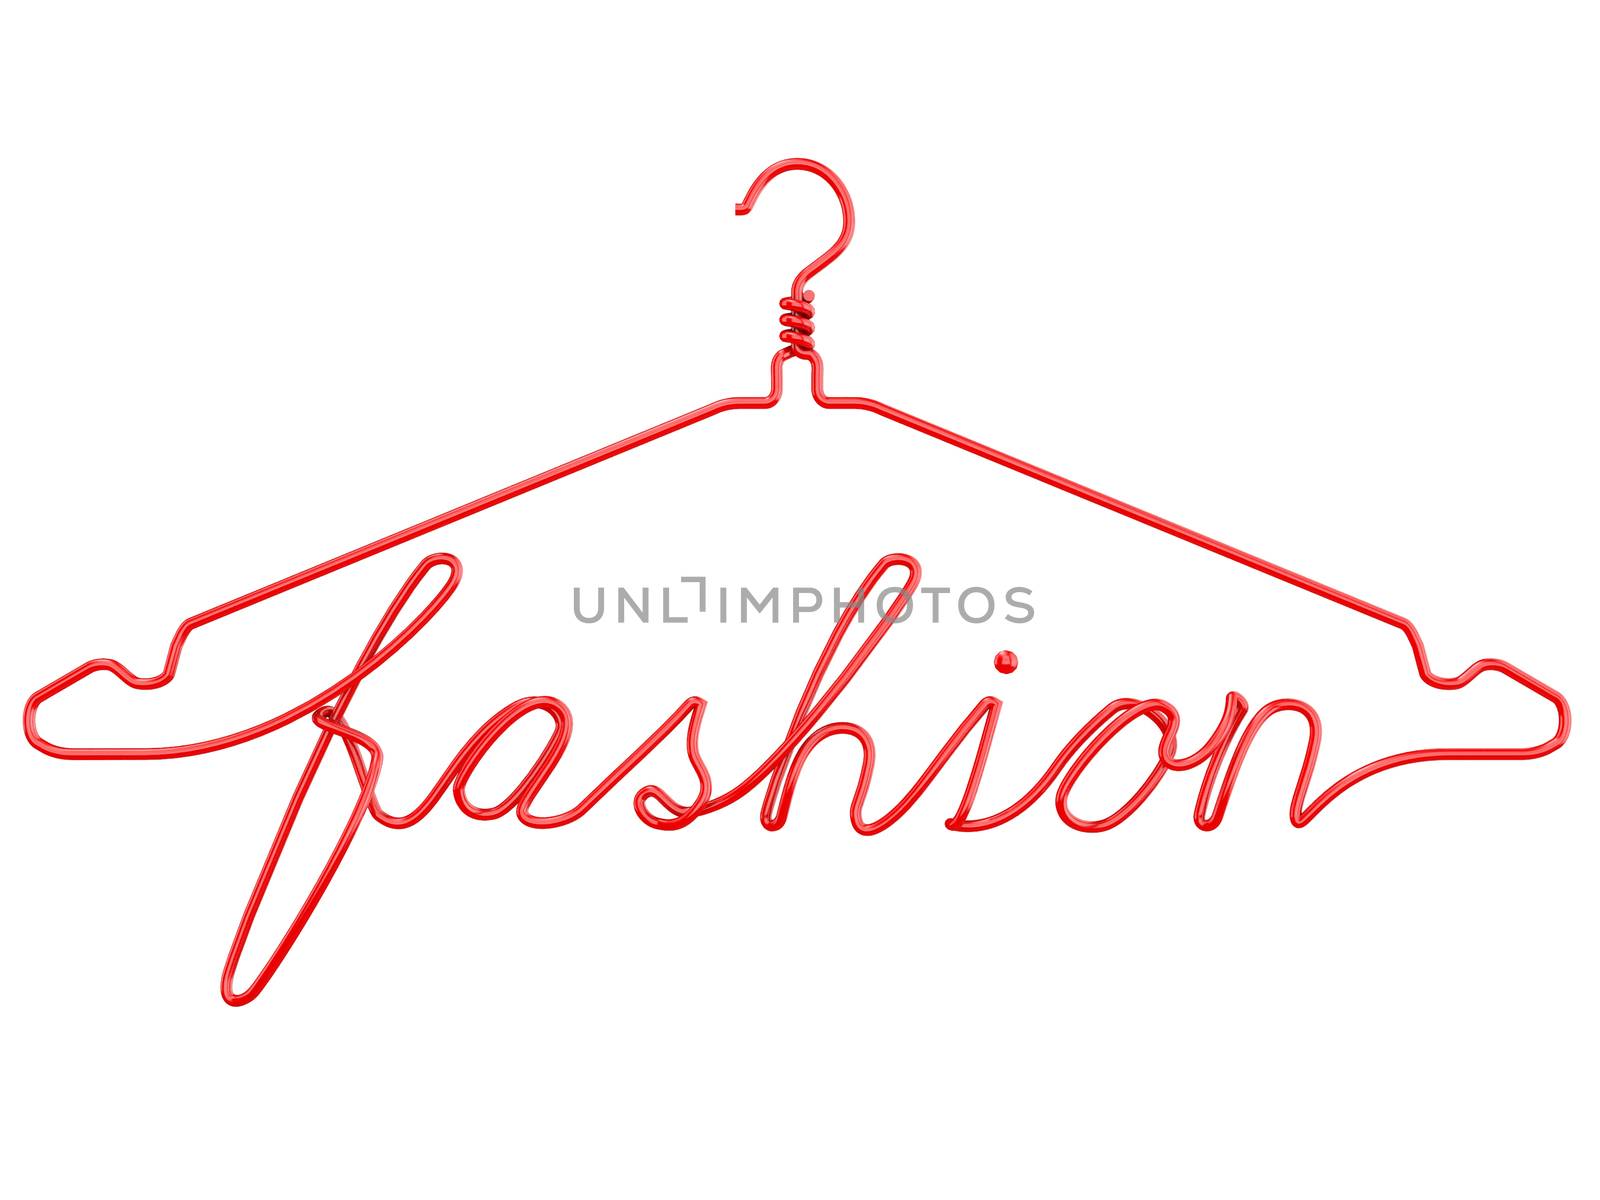 Red wire clothes hangers with message - FASHION. 3D render isolated on white background.